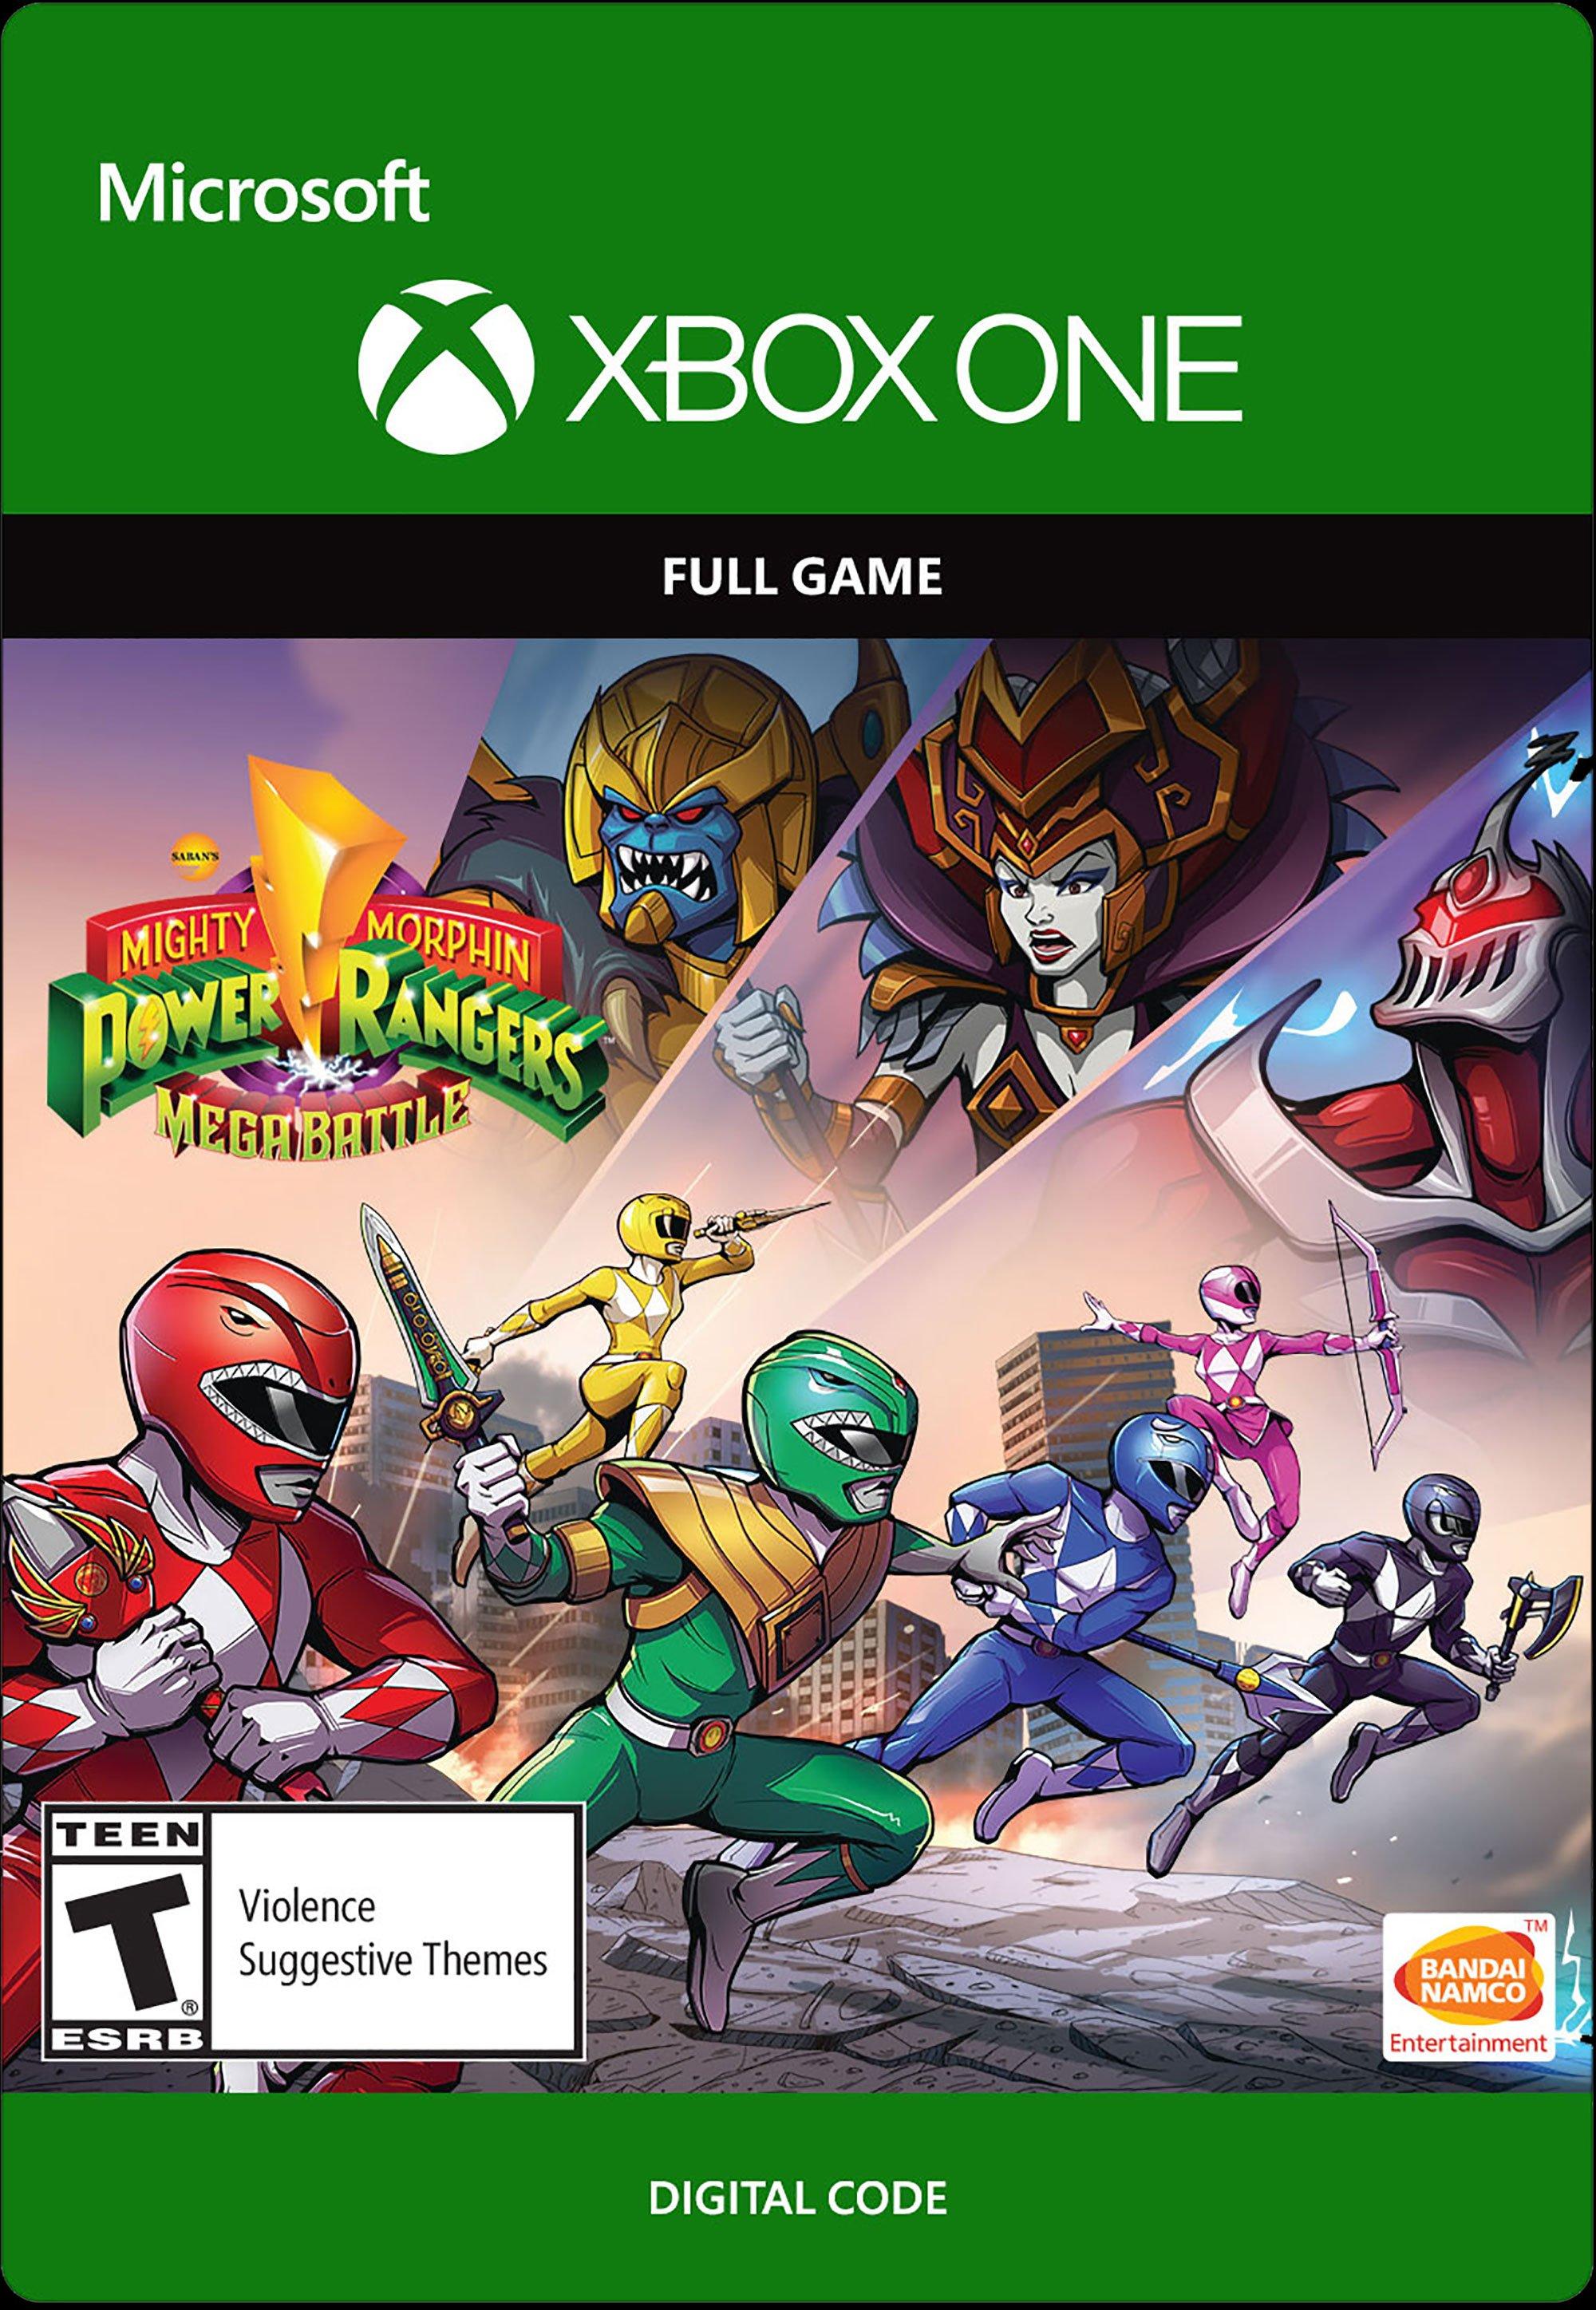 power rangers video game ps4